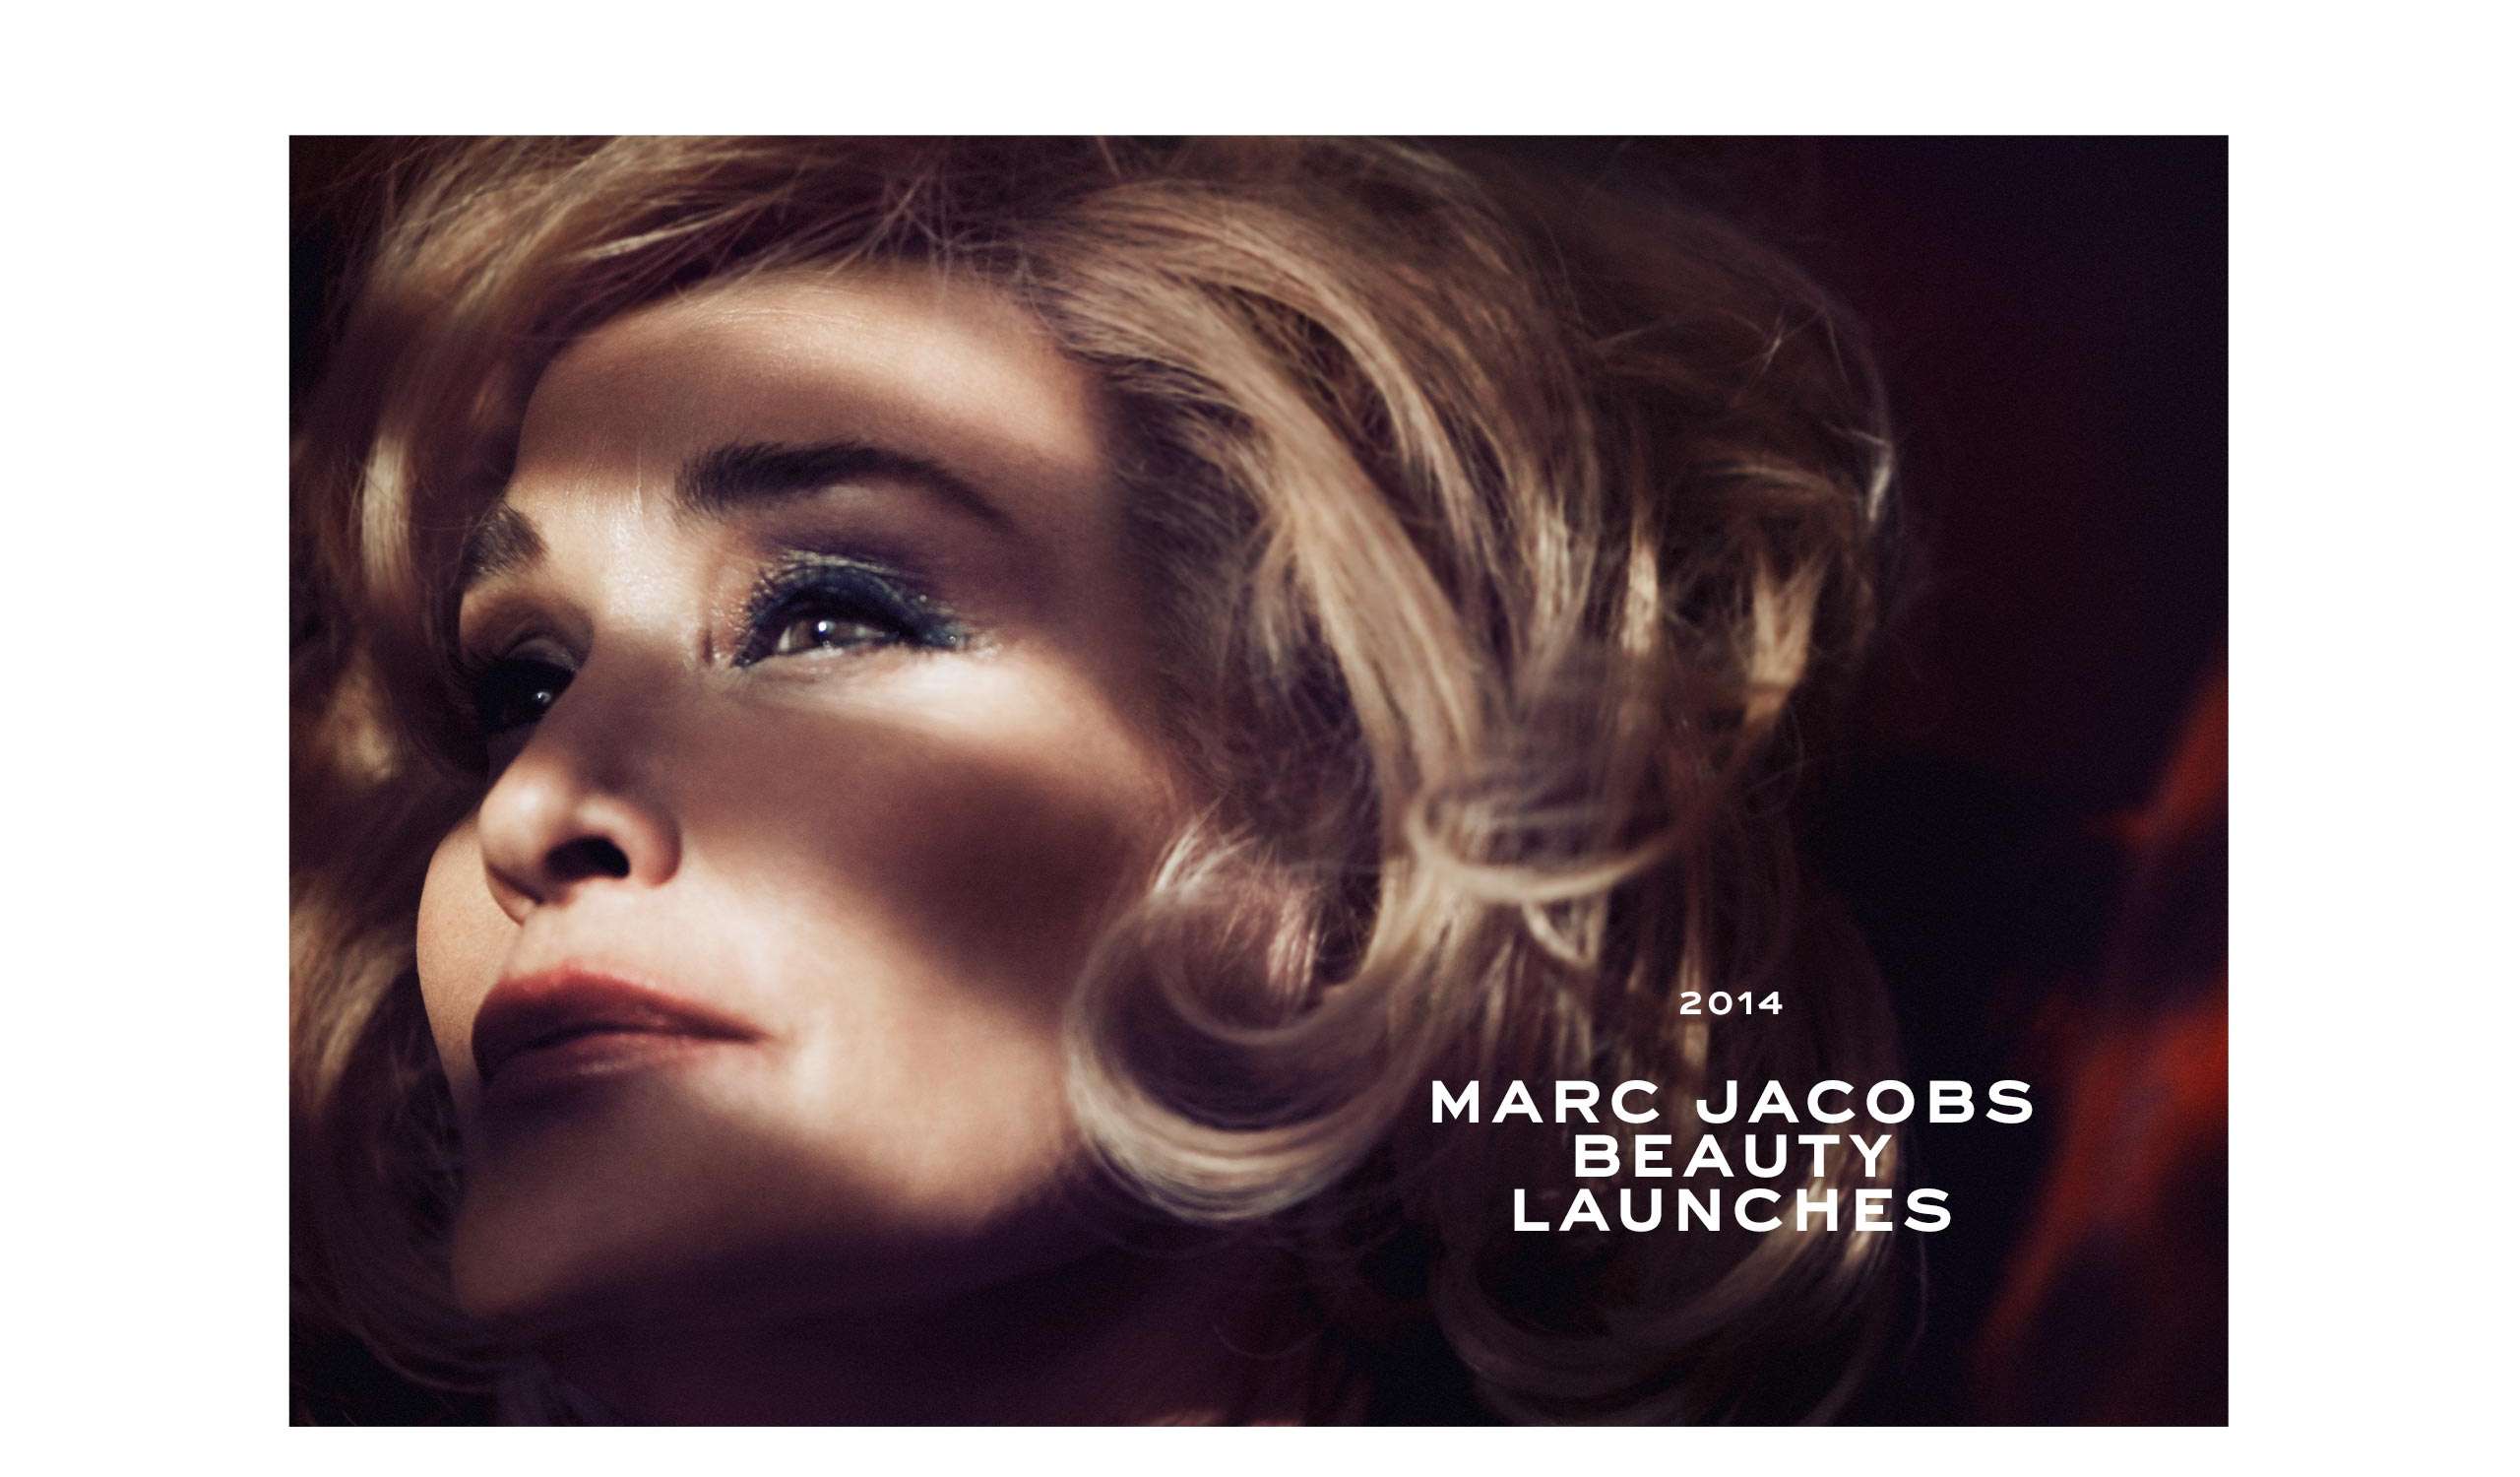 2014: Marc Jacobs Beauty launches.